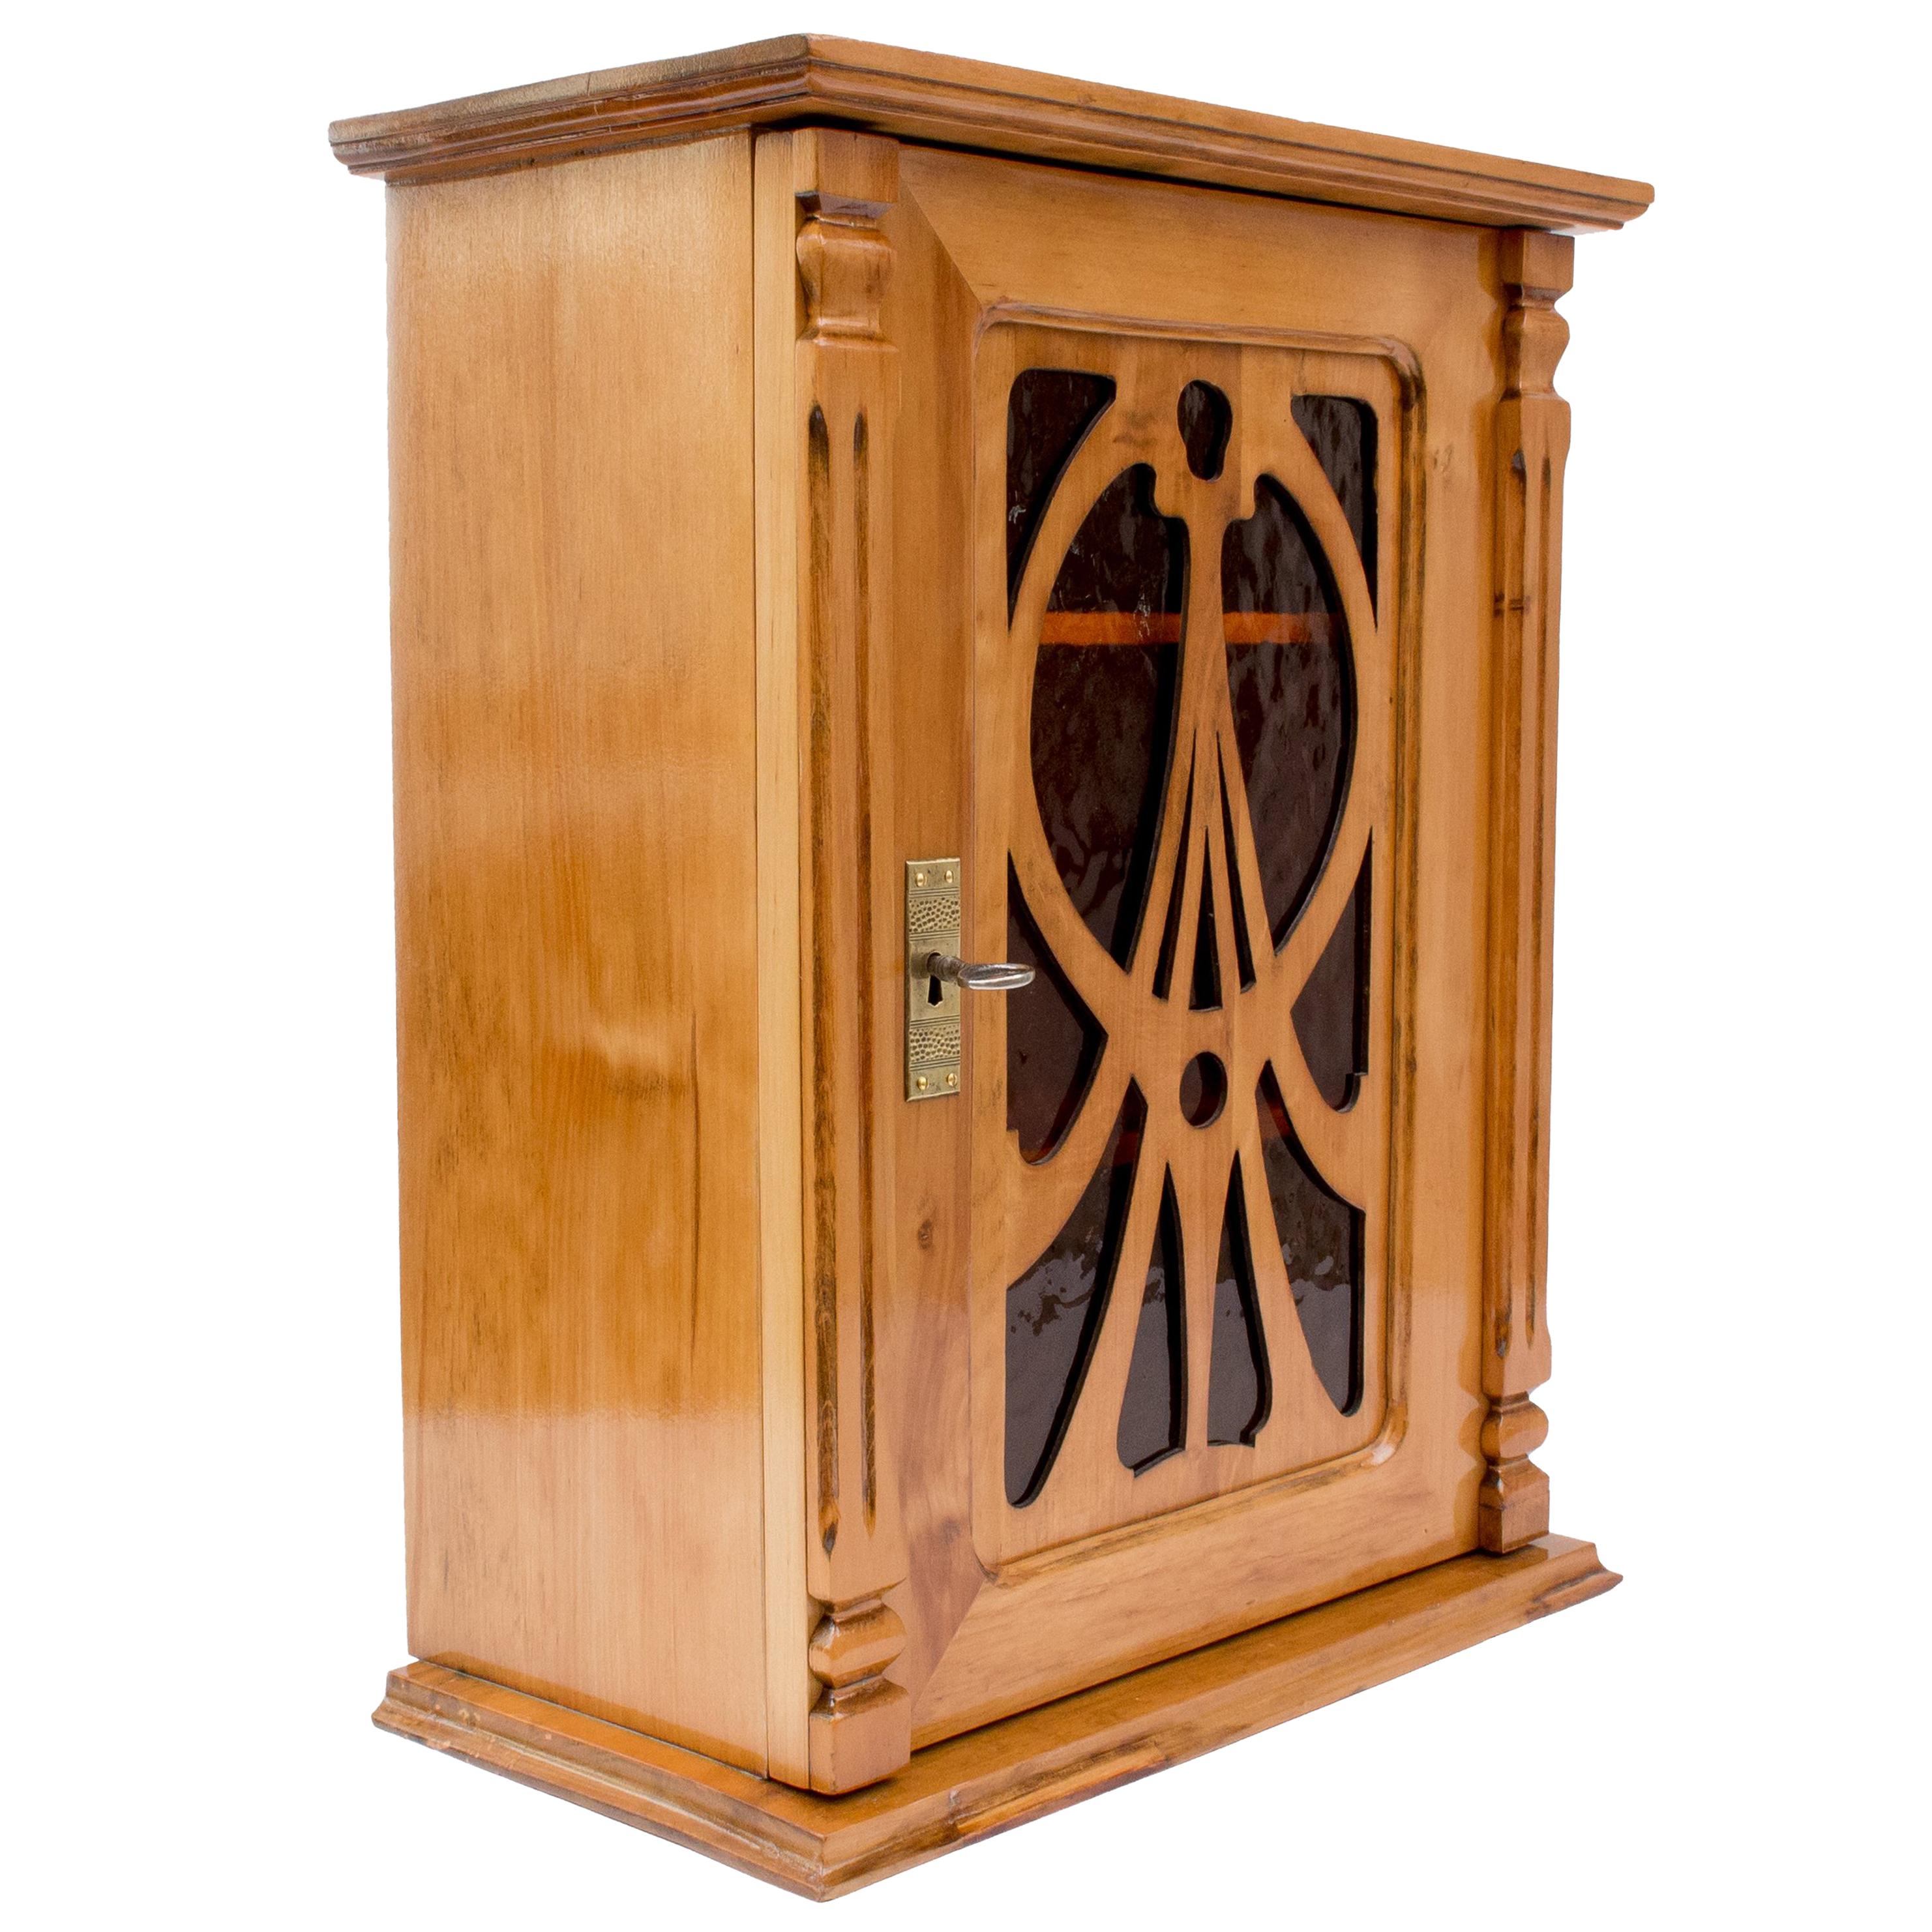 Late 19th Century Art Nouveau Plum-Wood Hanging Wall Cabinet